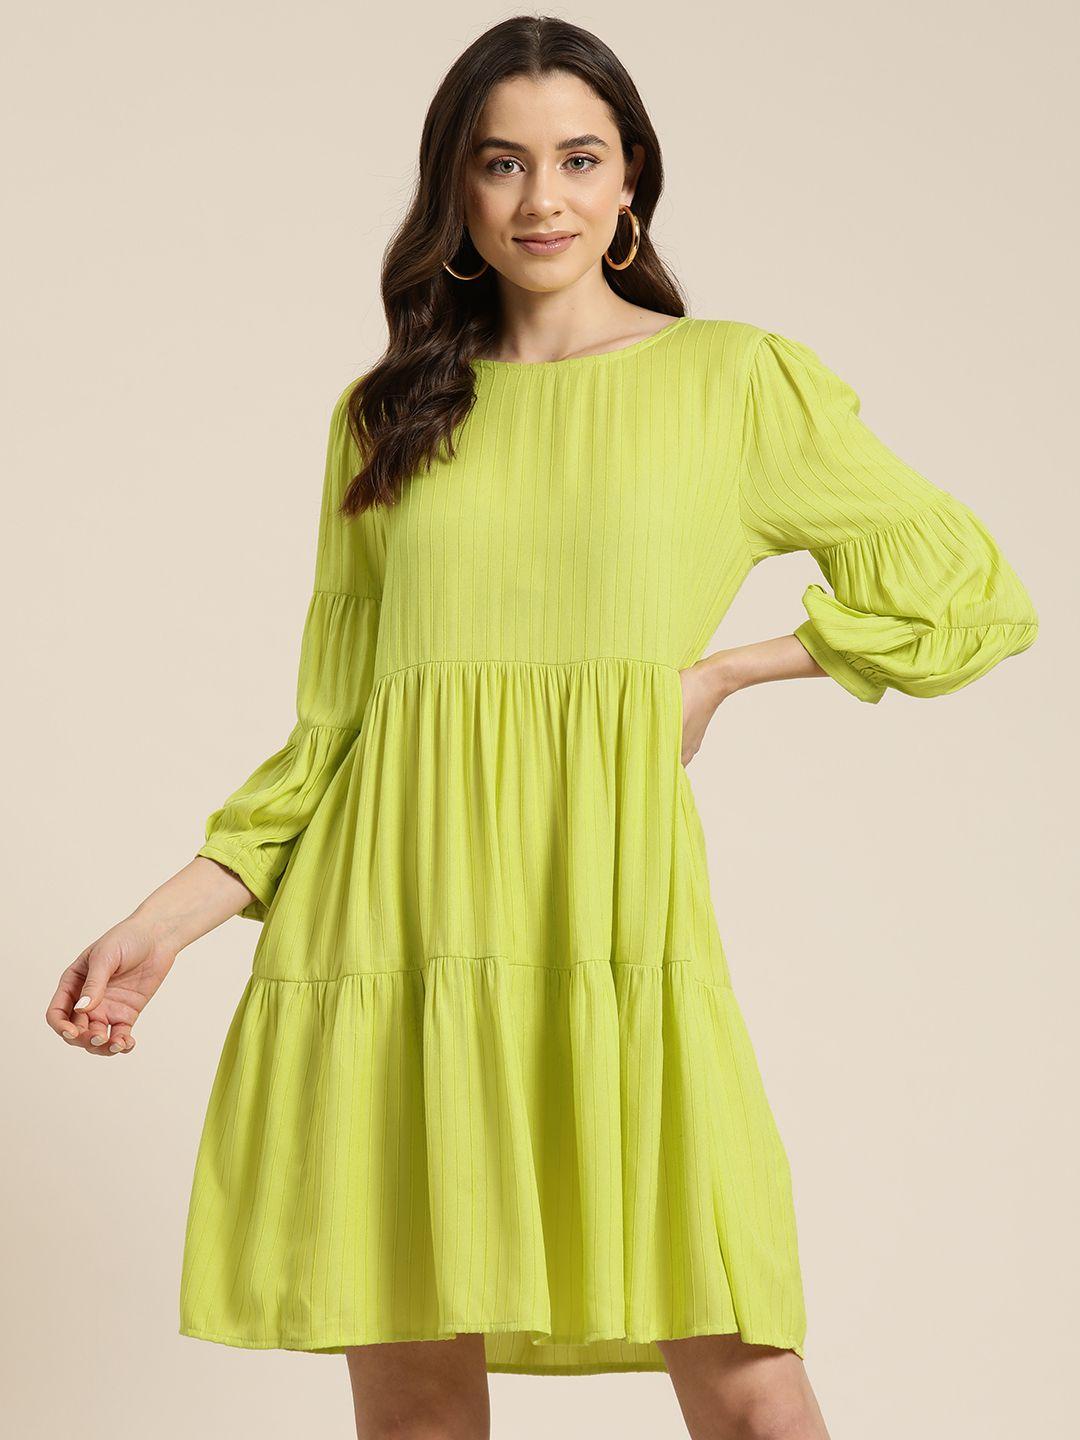 here&now striped puff sleeves tiered a-line dress